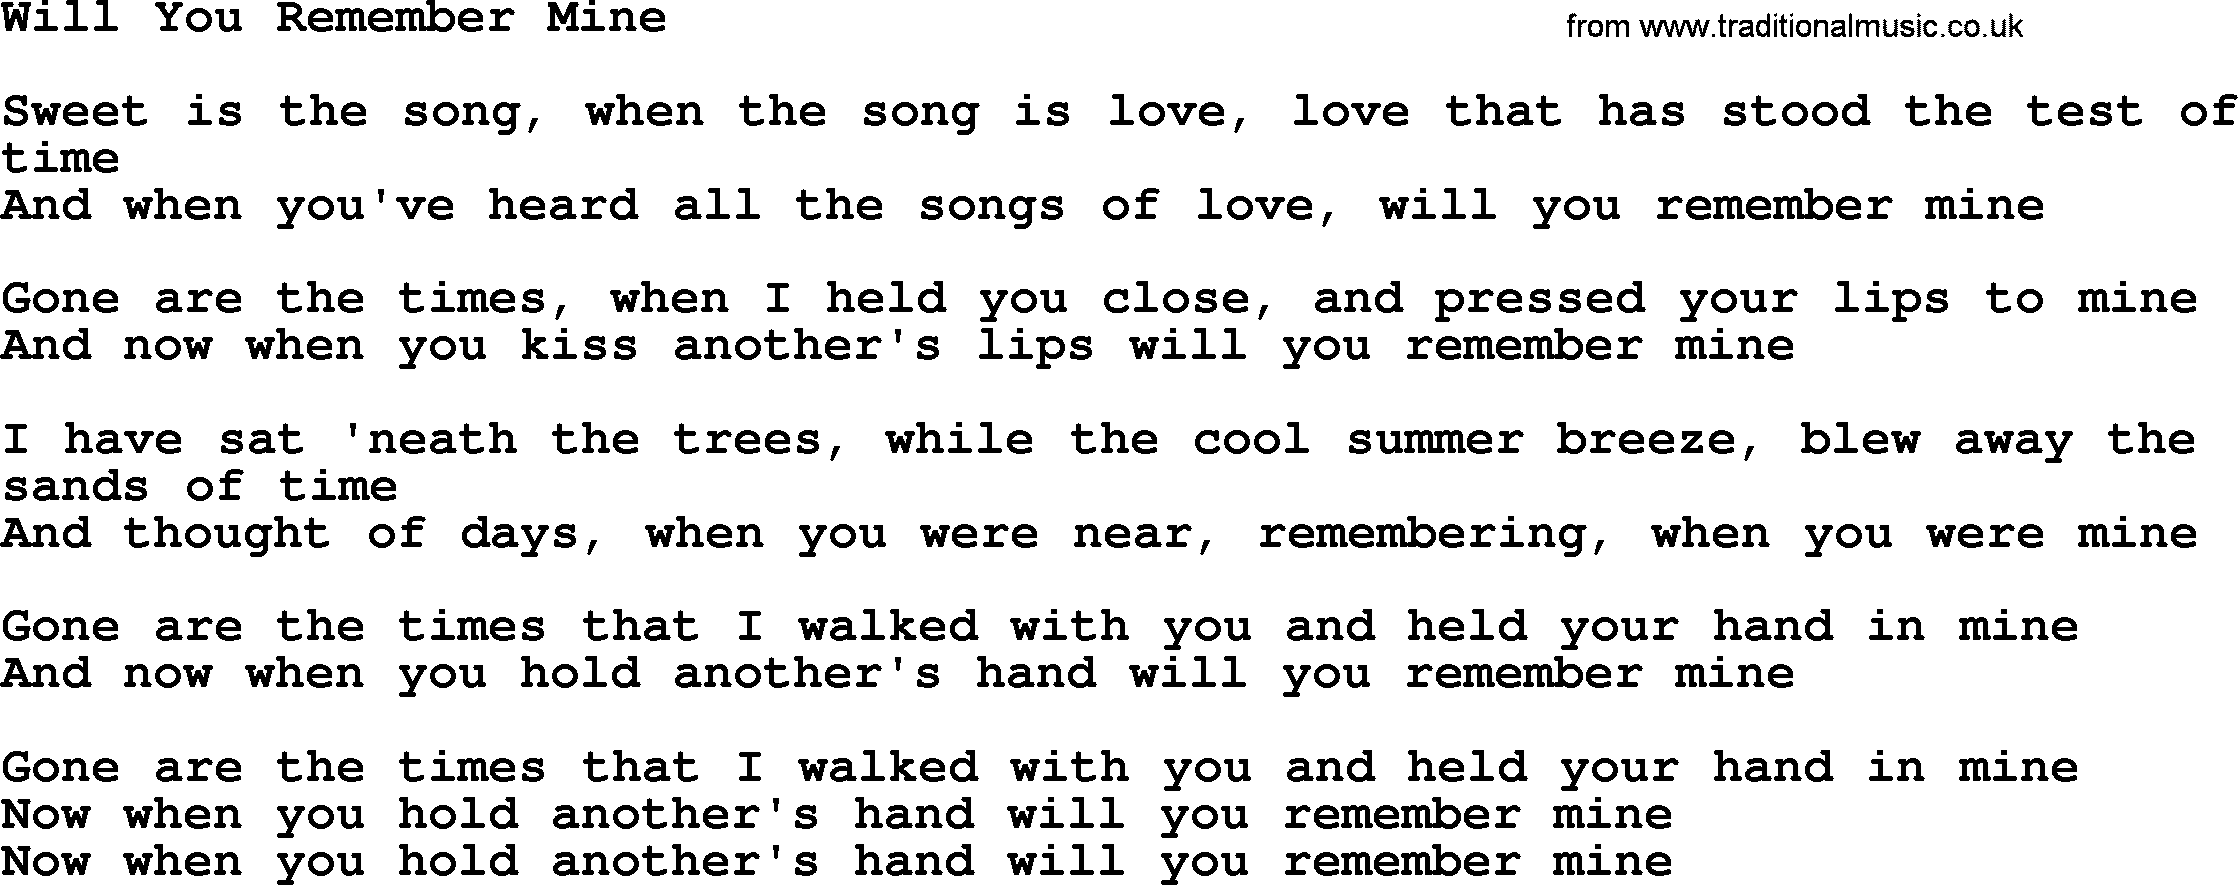 Willie Nelson song: Will You Remember Mine lyrics